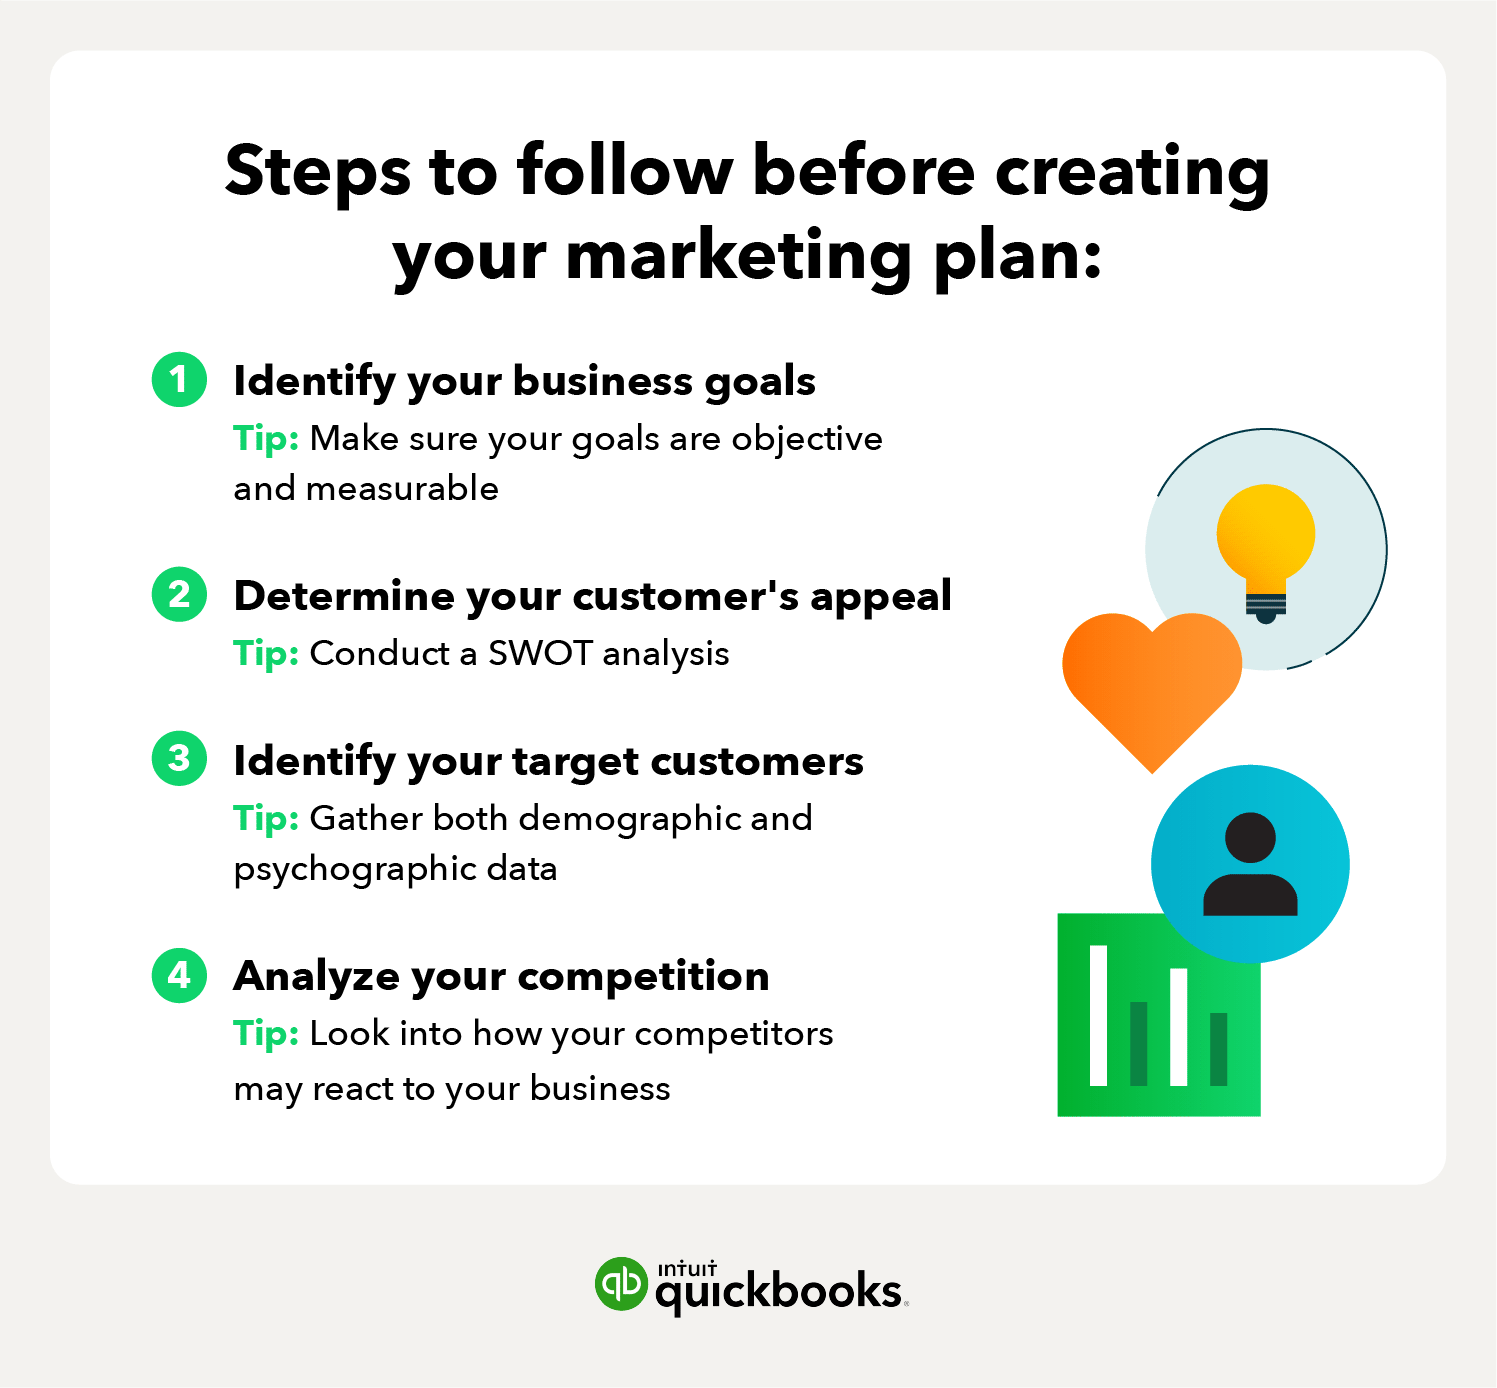 steps to follow before creating a marketing plan with icons like a green graph, orange heart, yellow lightbulb, and blue person sign